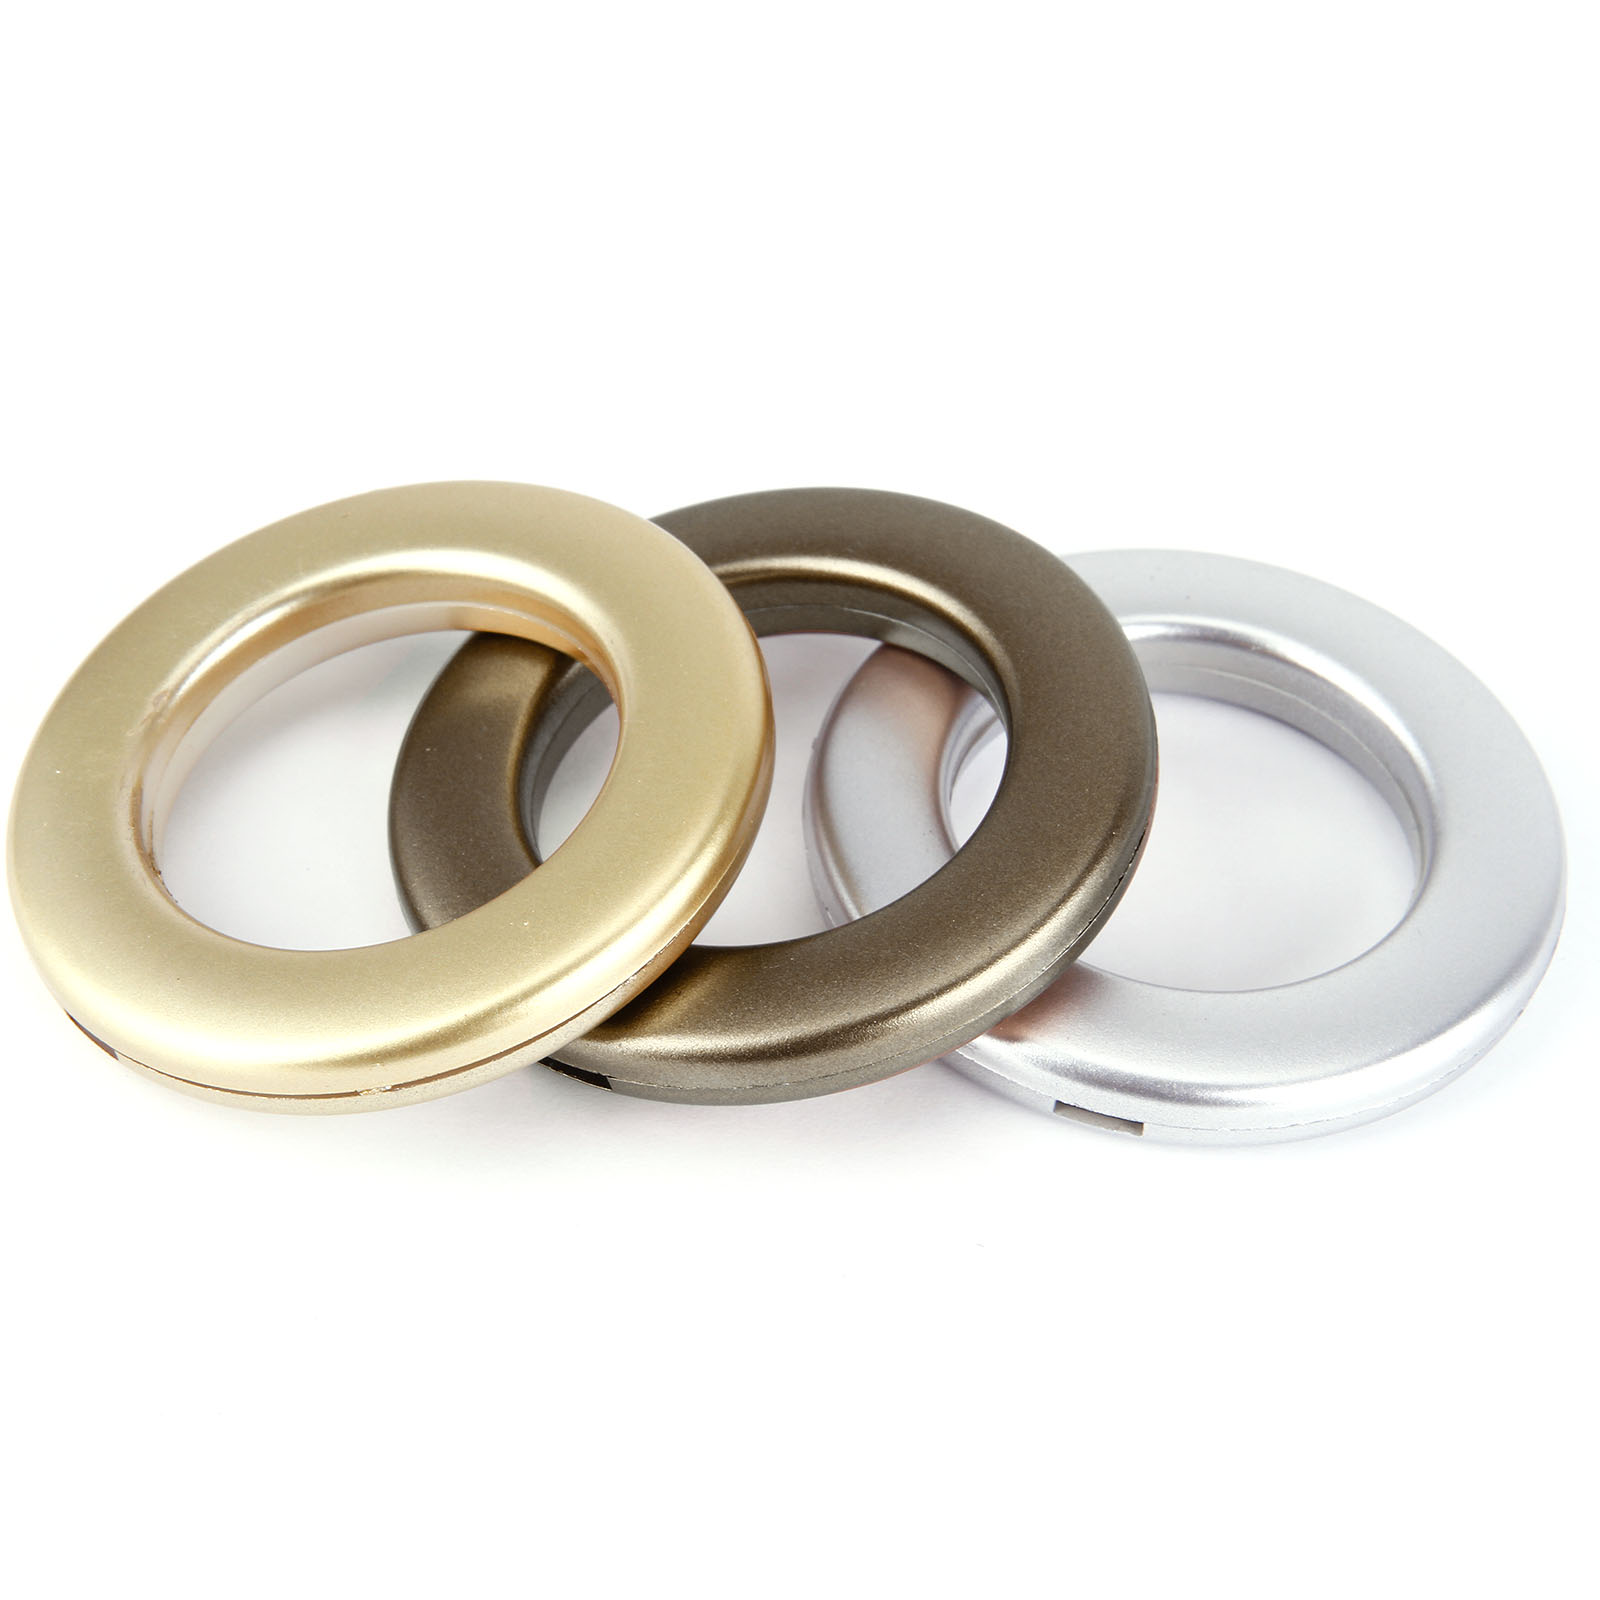 Details about   Curtain Eyelet Tape Translucent & snap on rings from £4.99 per for Voiles & Nets 